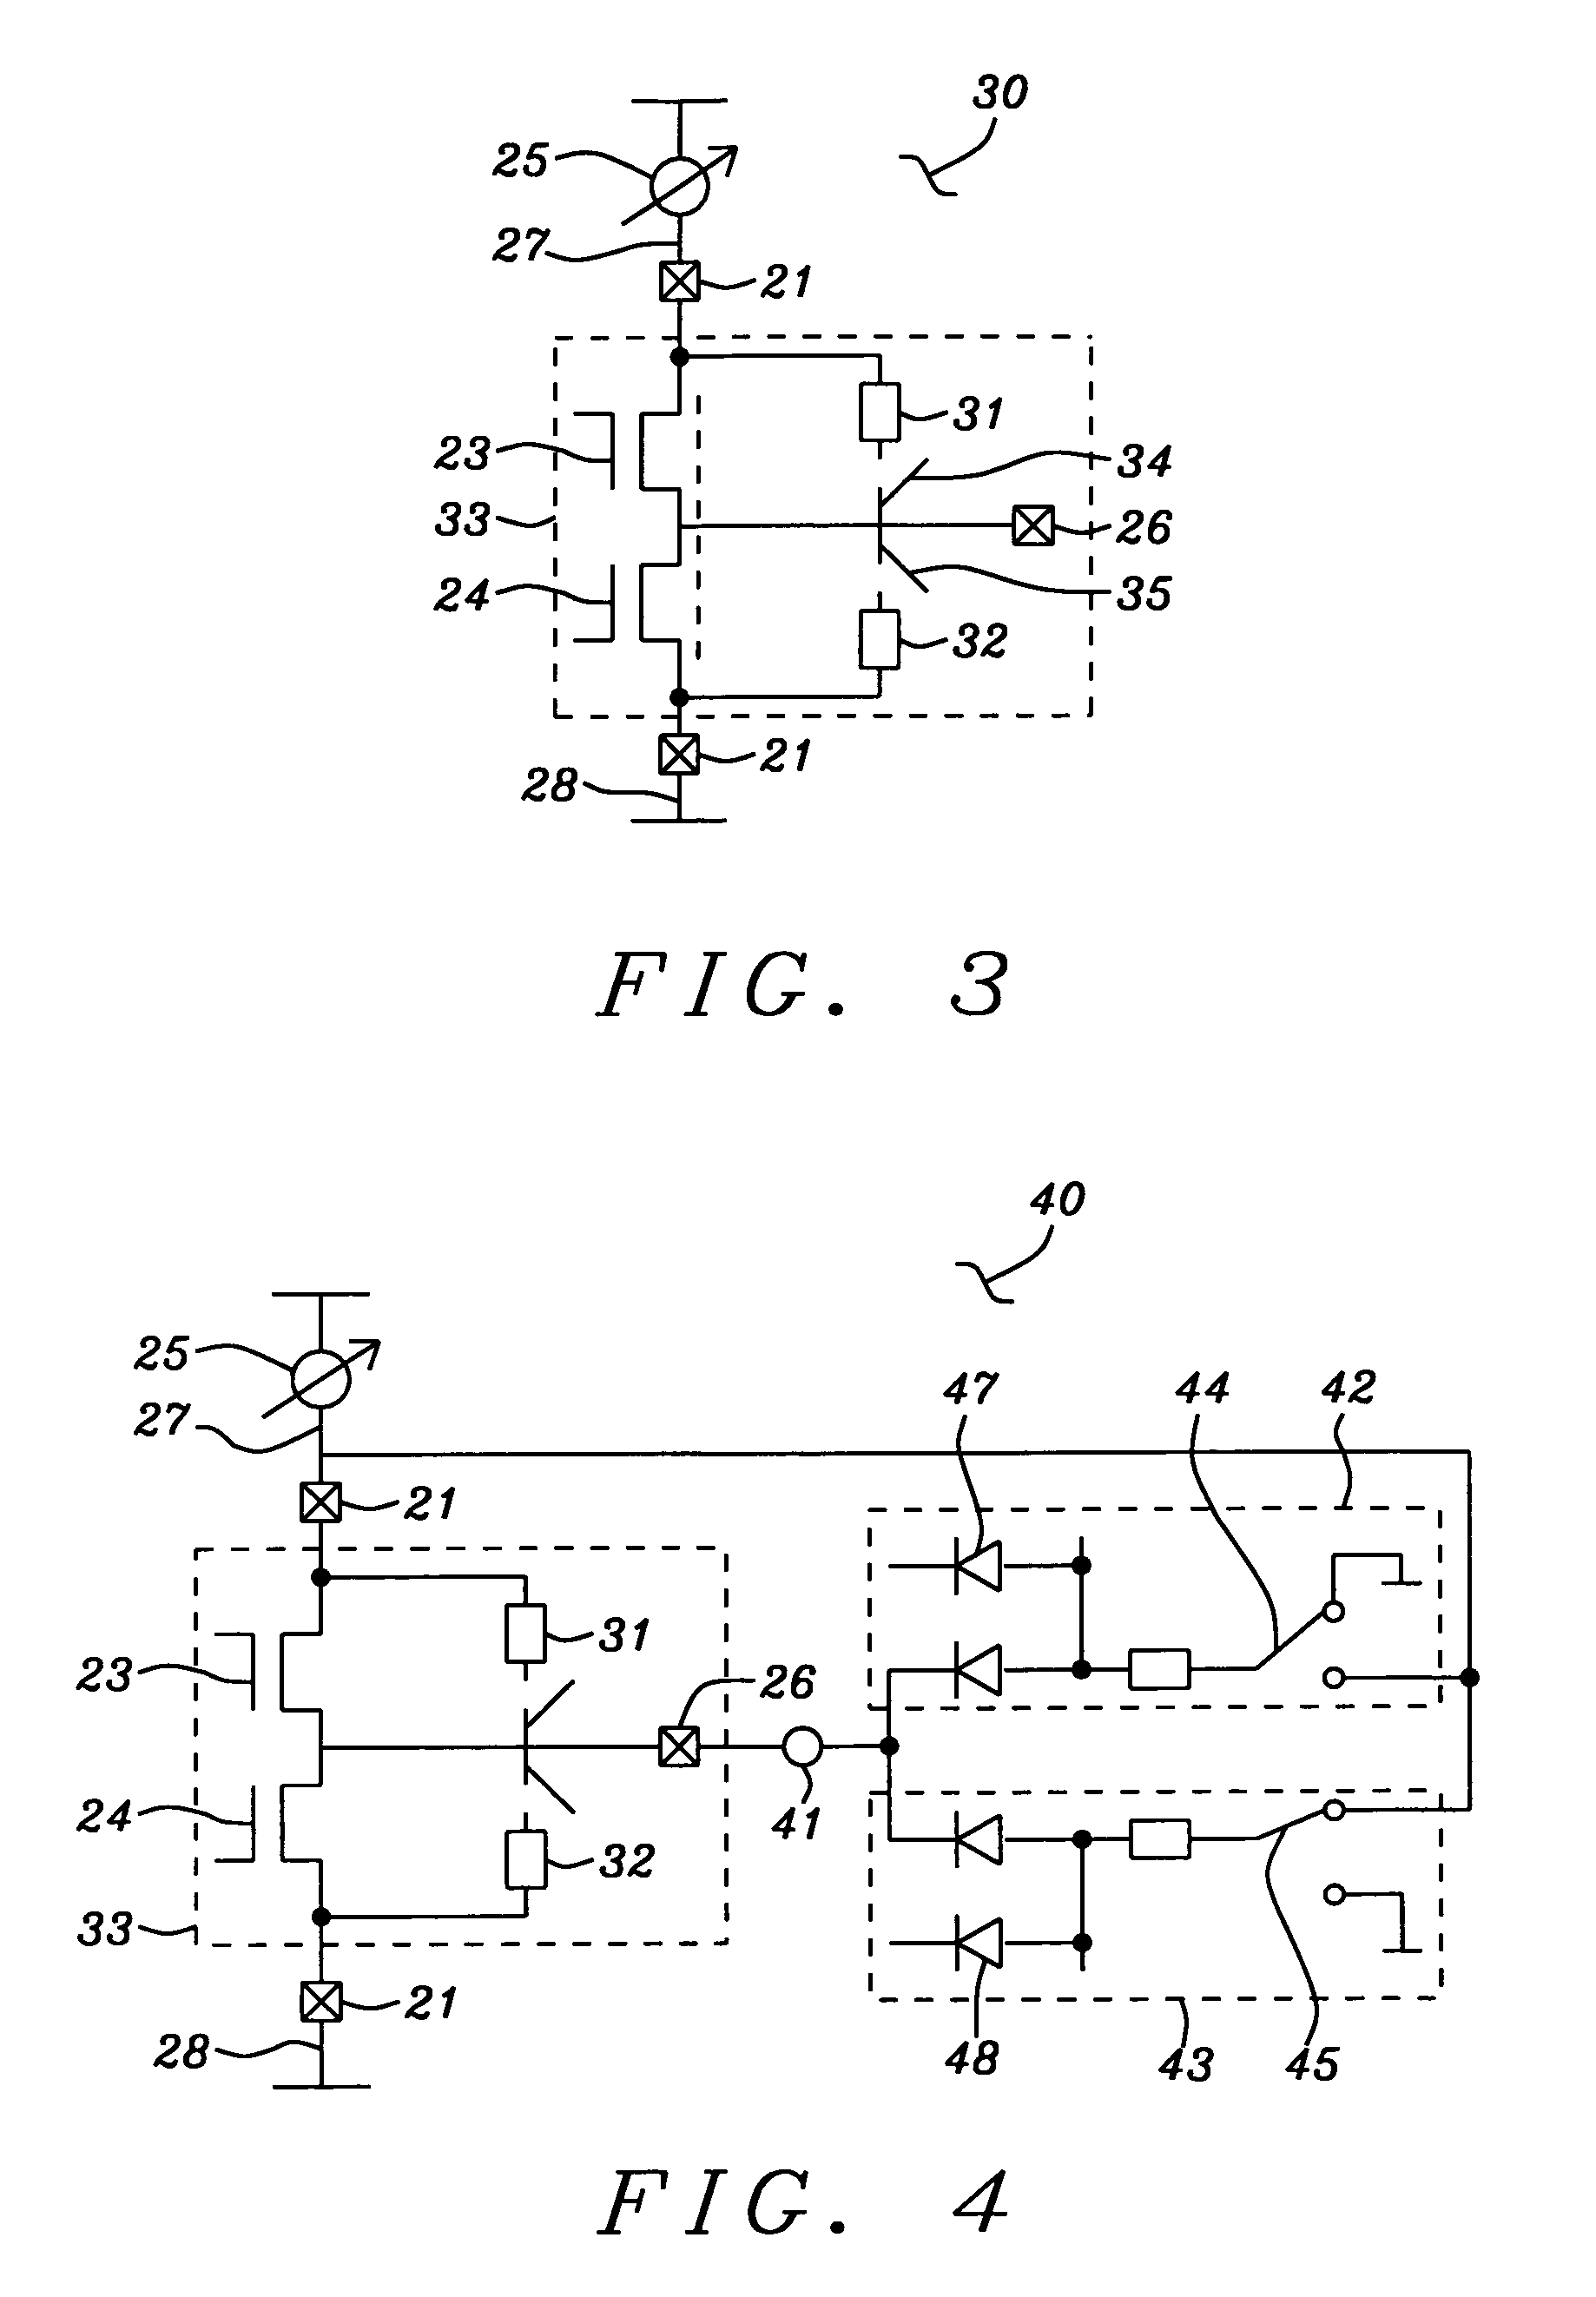 Supply current based testing of CMOS output stages